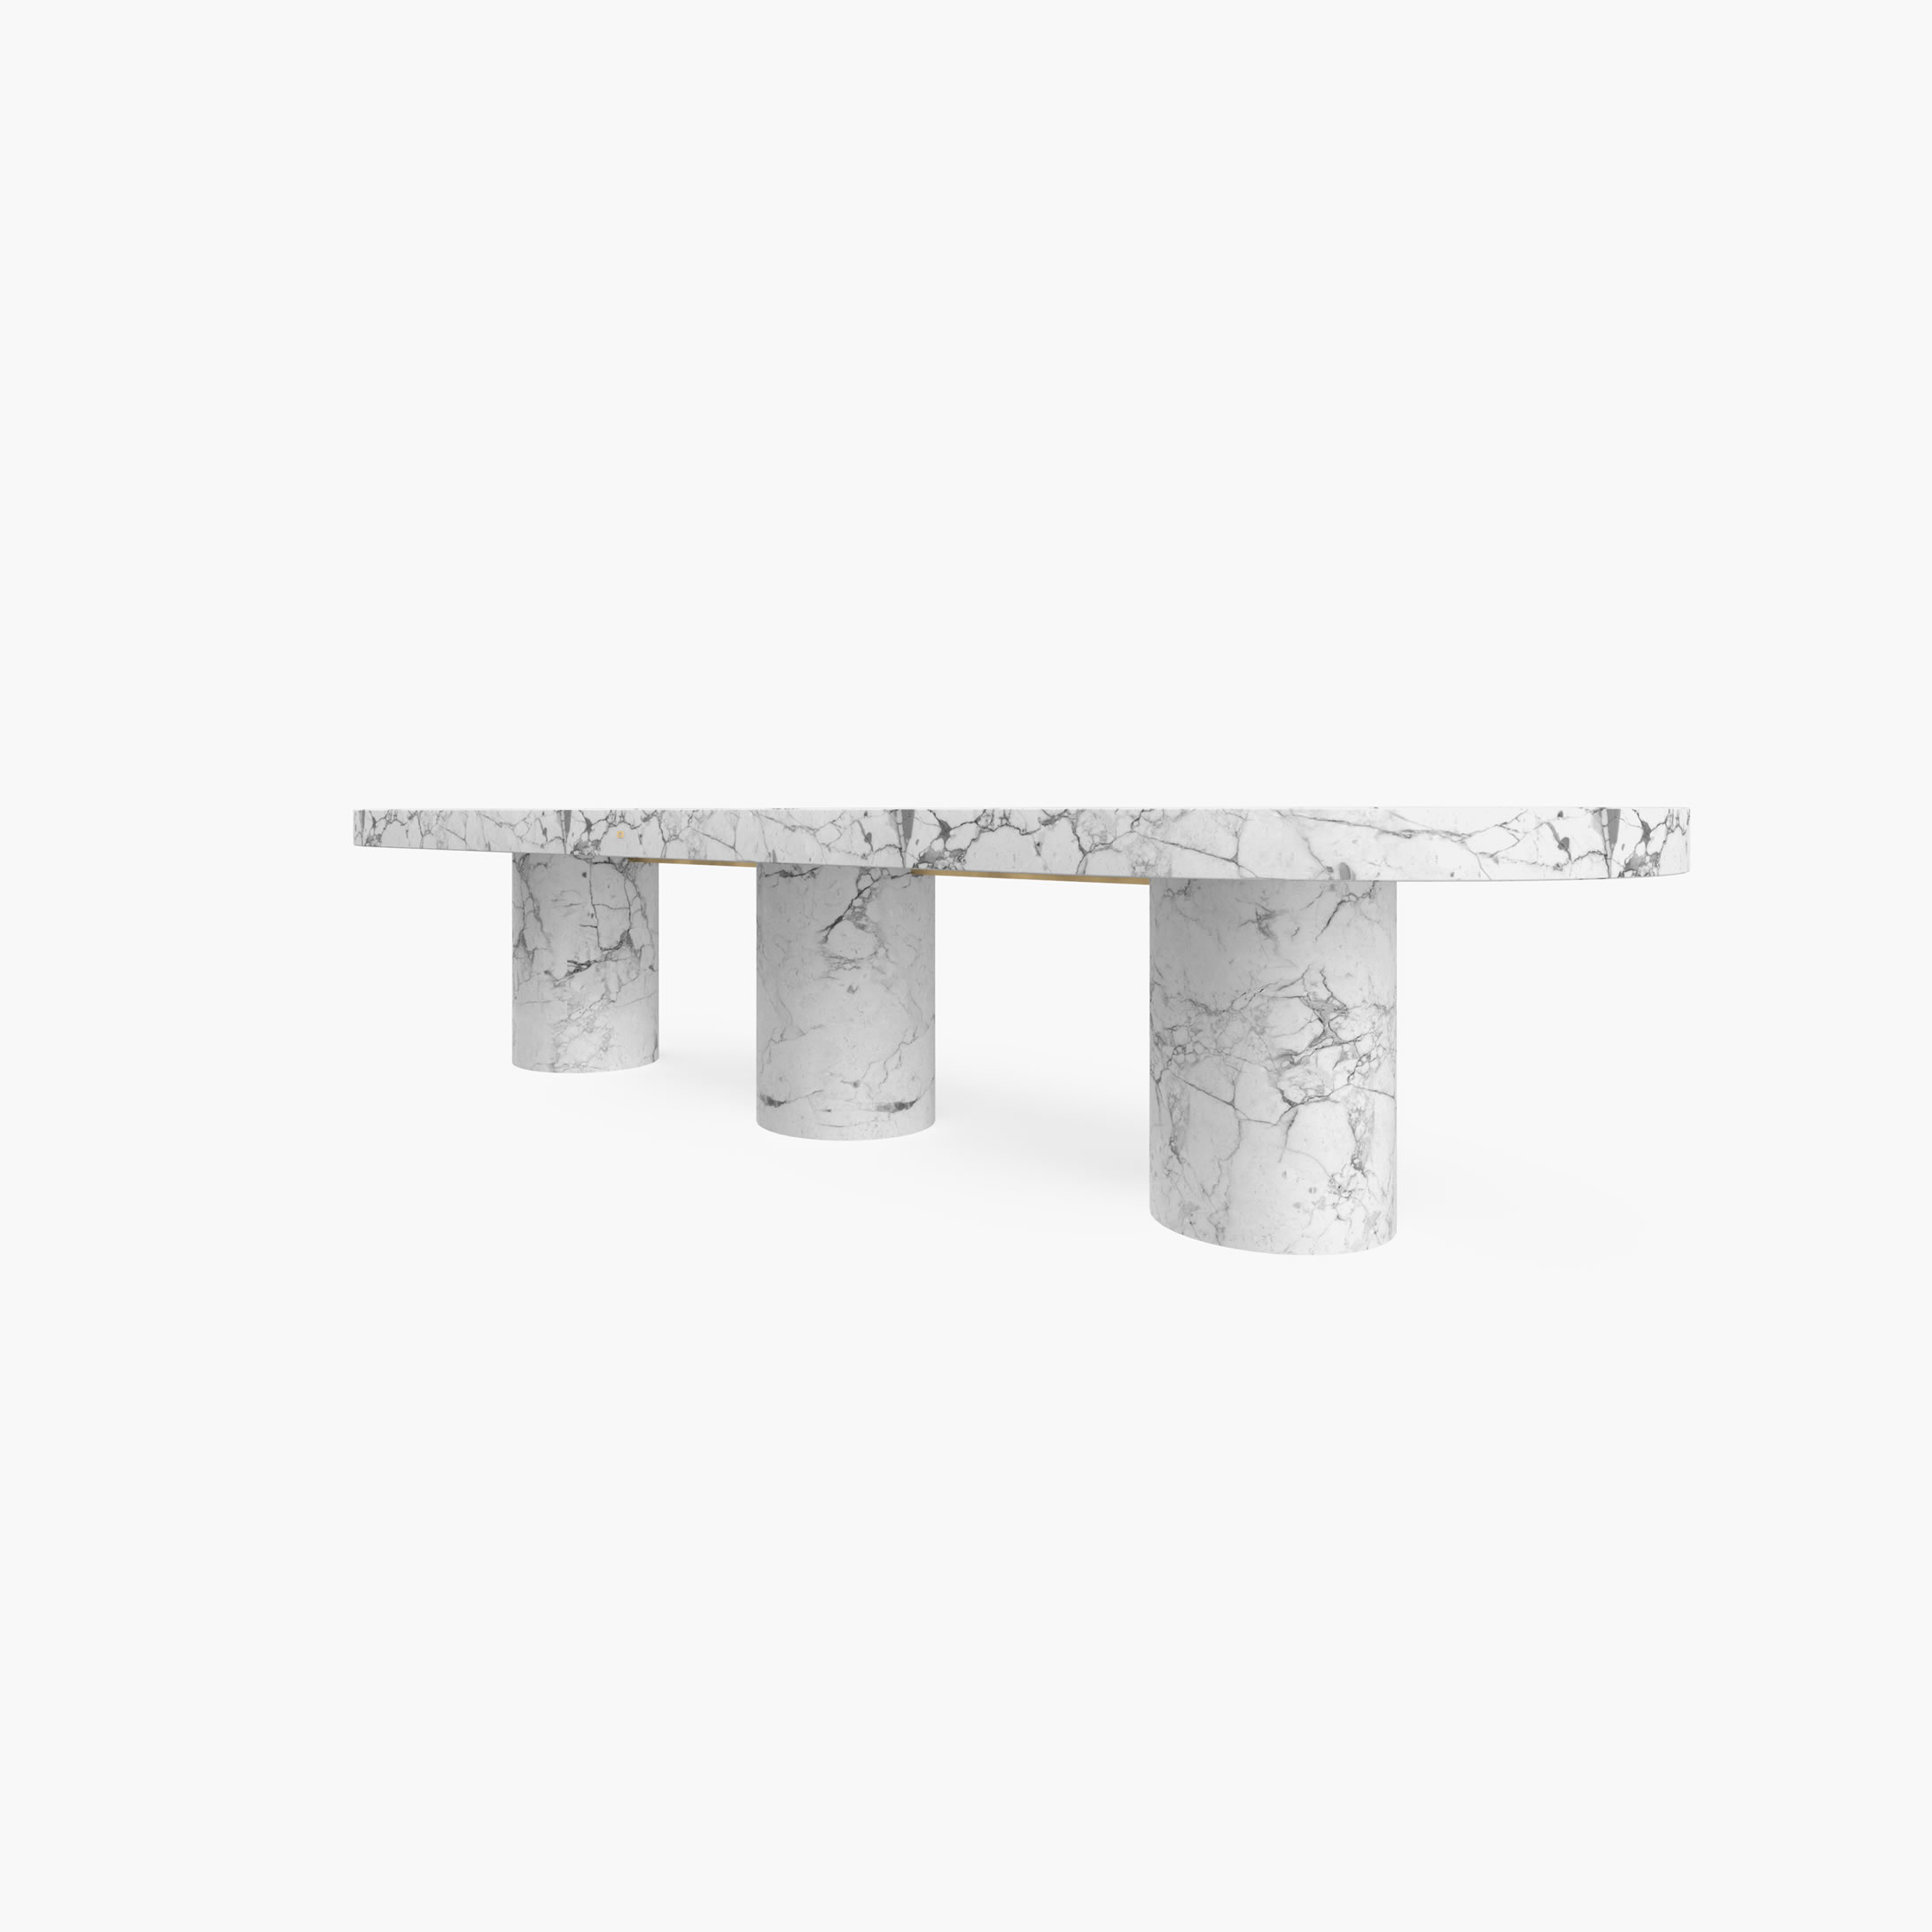 Dining Table large Cylinder legs White Arabescato Marble iconic Dining Room modern art Dining Tables FS 179 FELIX SCHWAKE